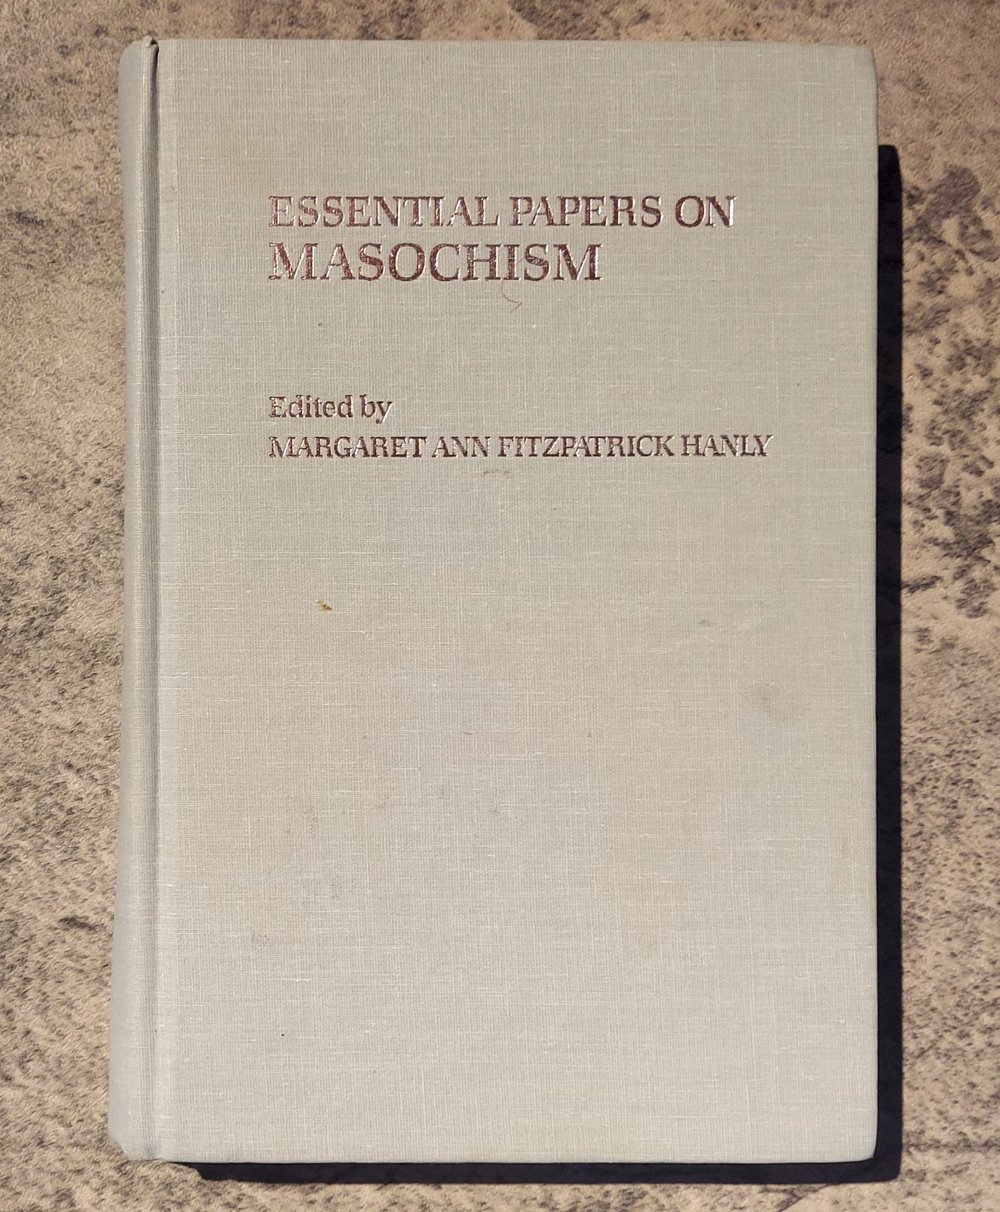 Essential Papers on Masochism, by Margaret Ann Fitzpatrick Hanly